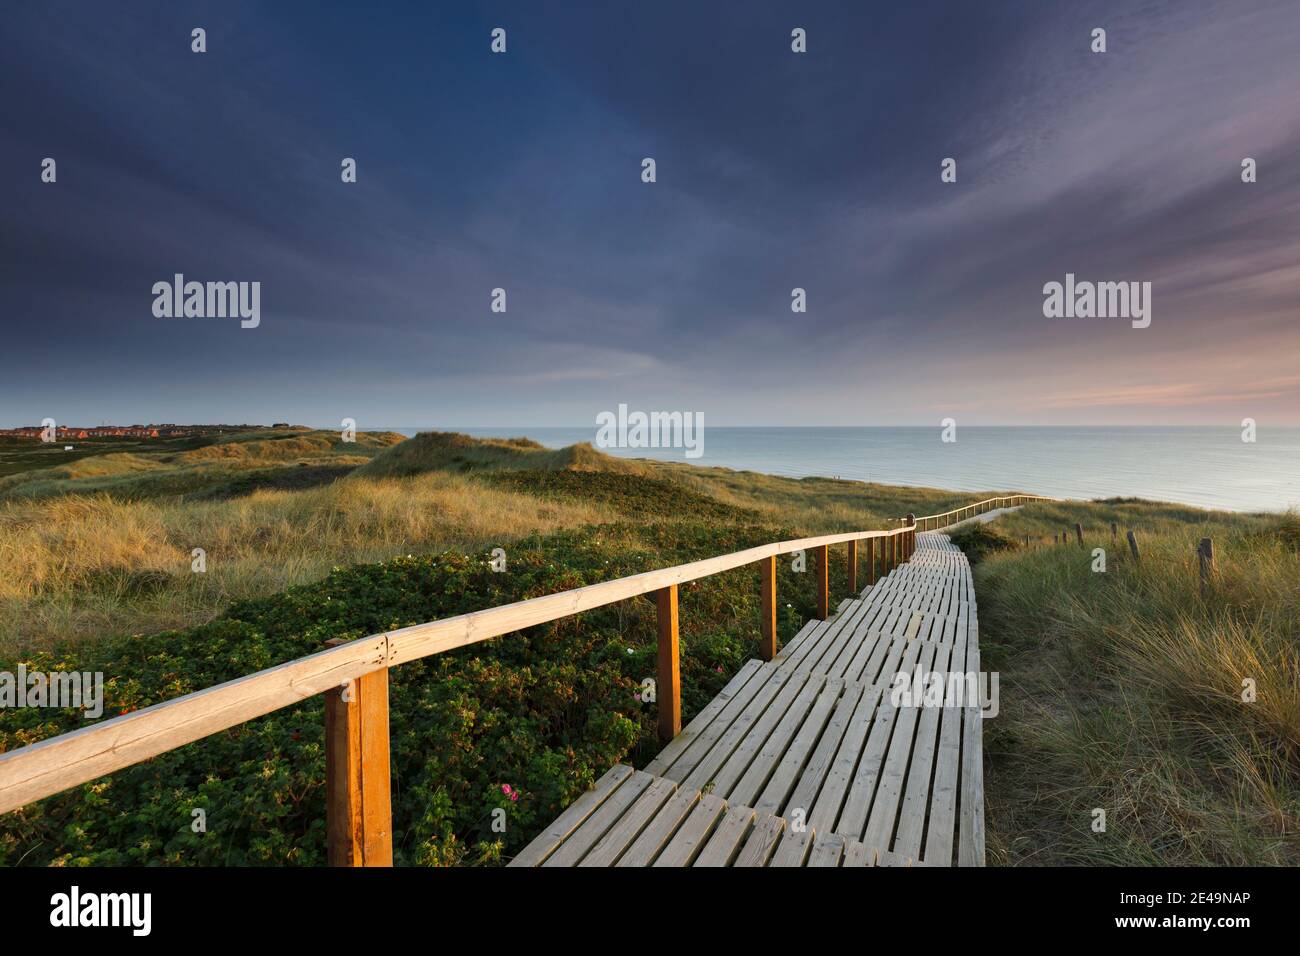 Wooden footbridge with railing as a beach crossing from Rantum in the evening light on the island of Sylt in North Friesland, Schleswig-Holstein, Germany Stock Photo